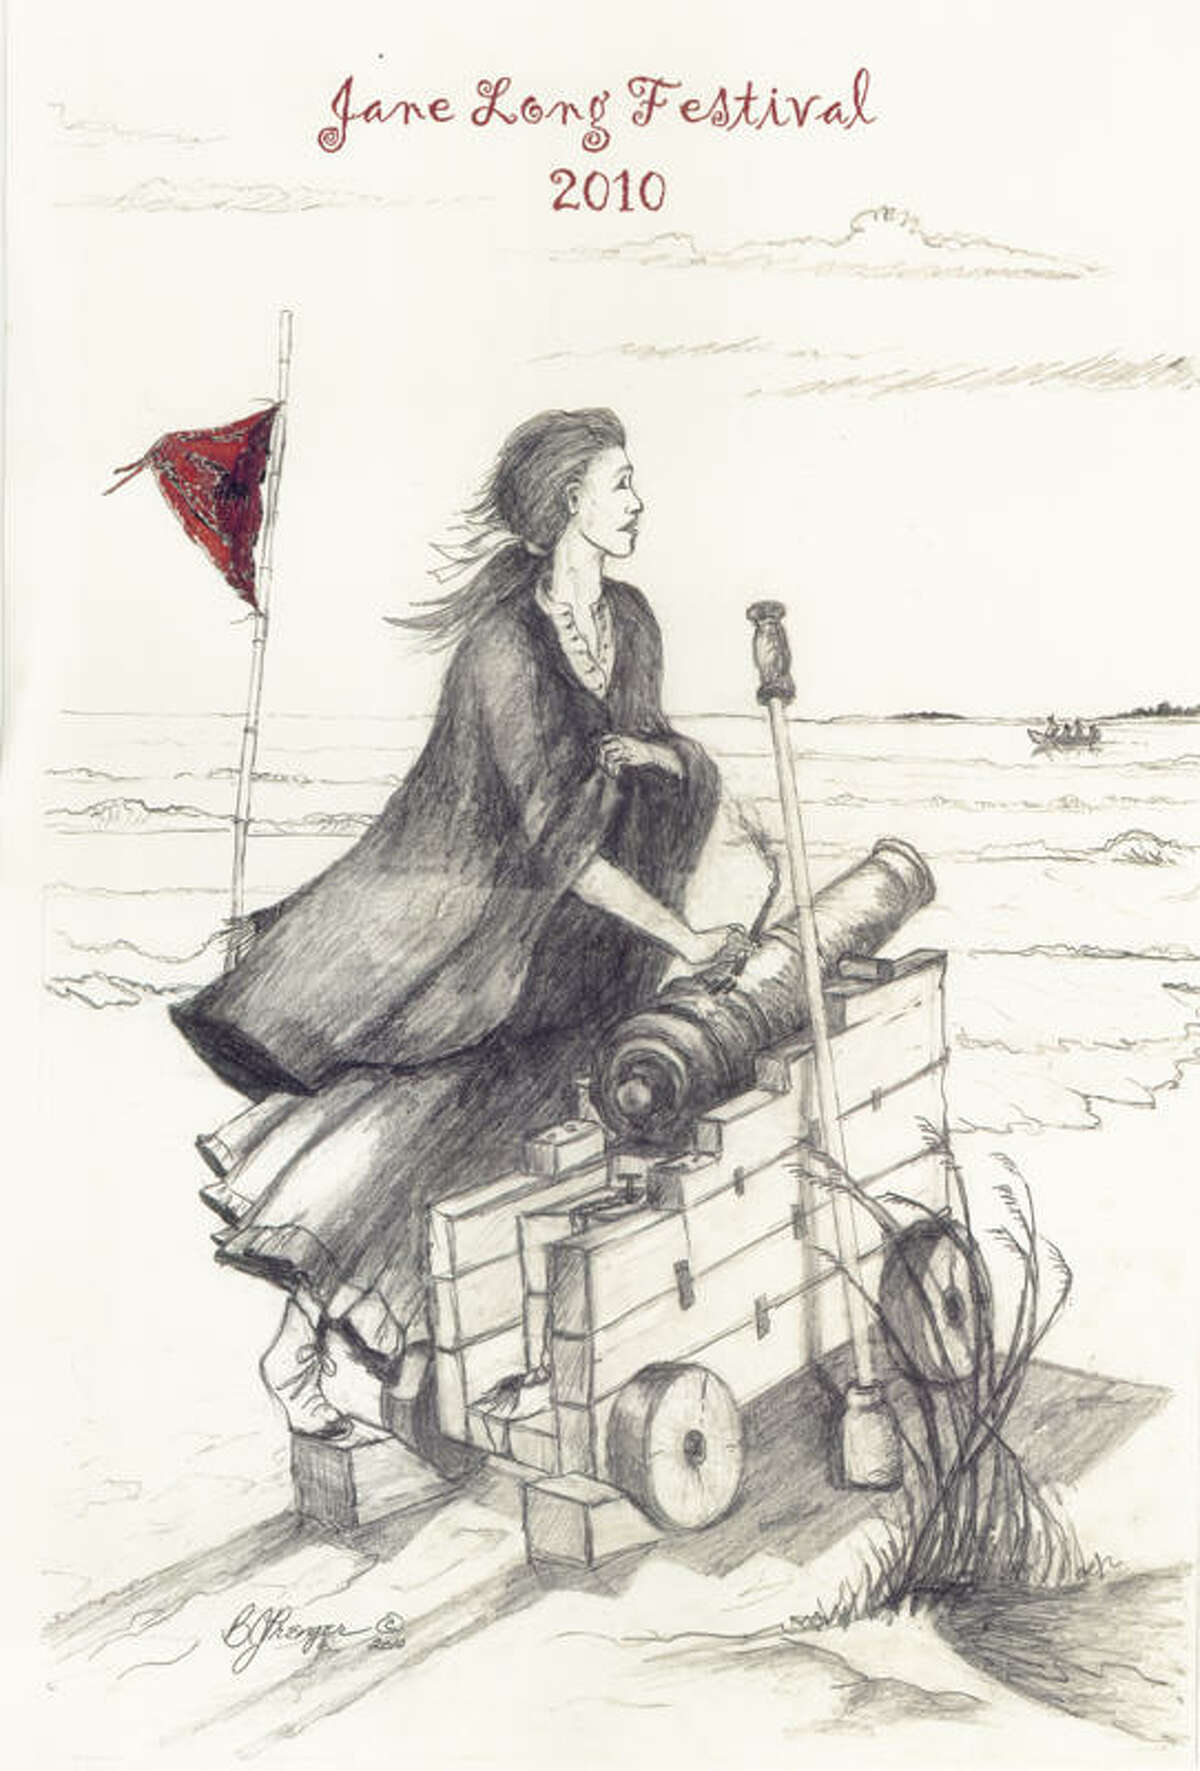 Jane Long and her famous cannon by Crystal Beach artist Barbara J. Prenger